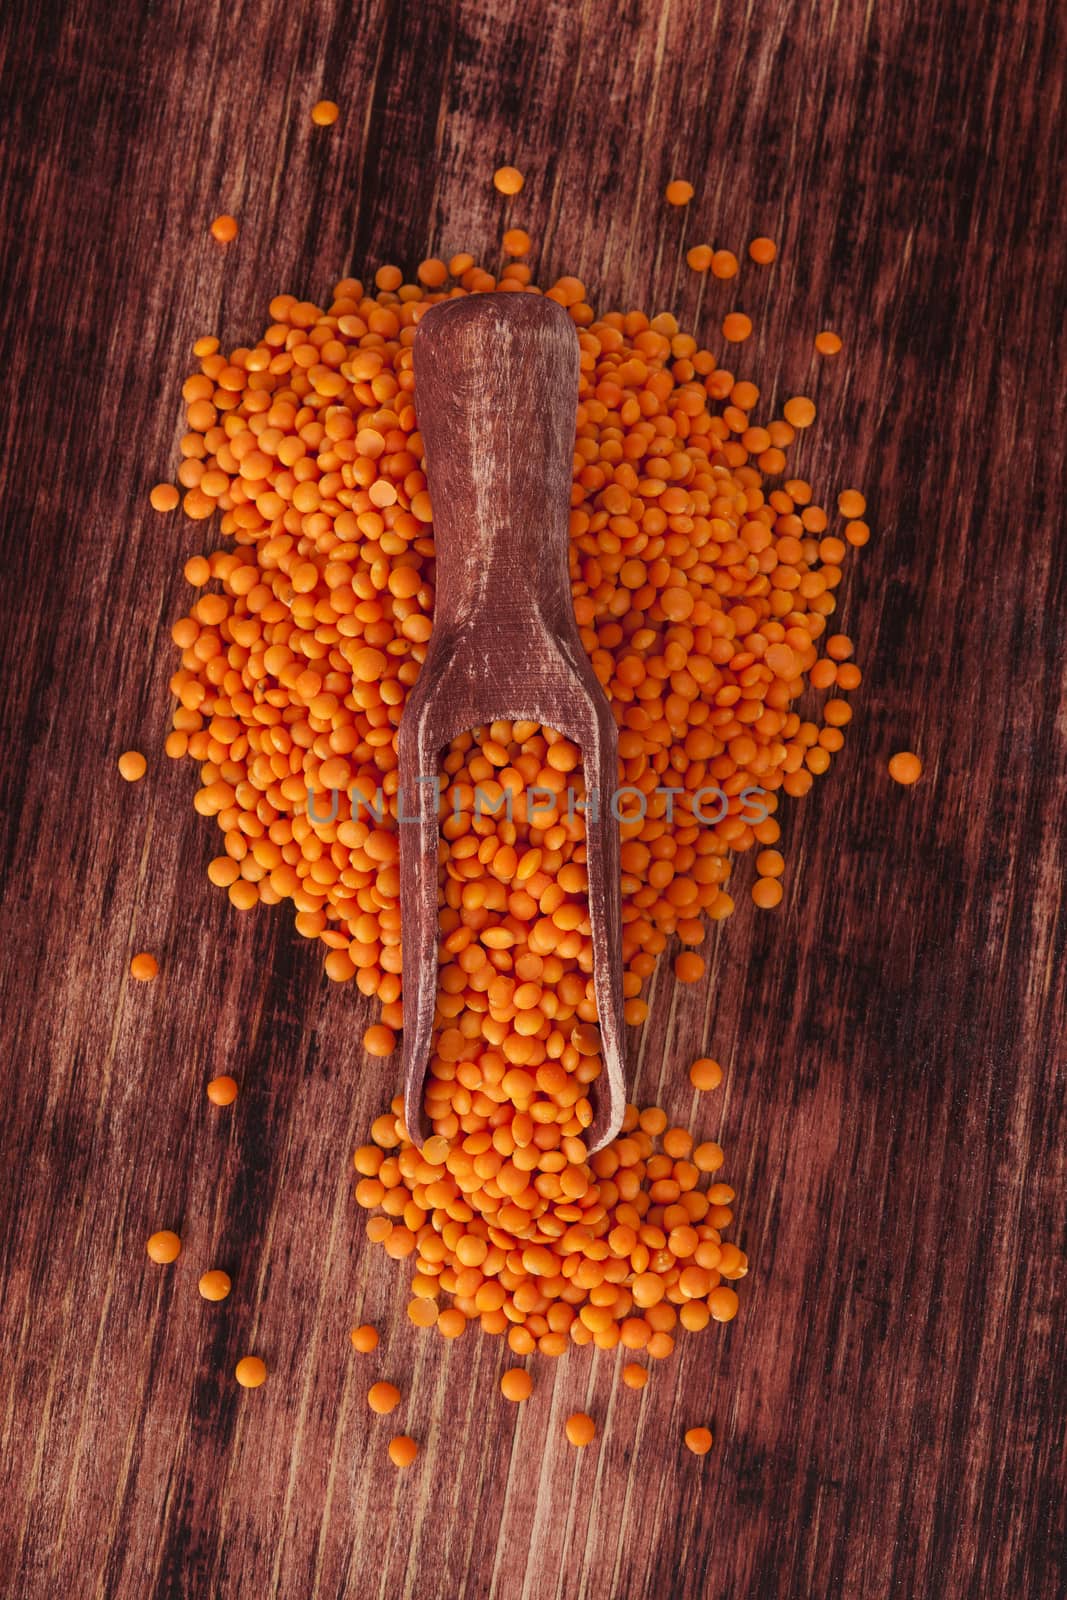 Red lentils on wooden spoon on dark wooden background. Healthy legume eating.